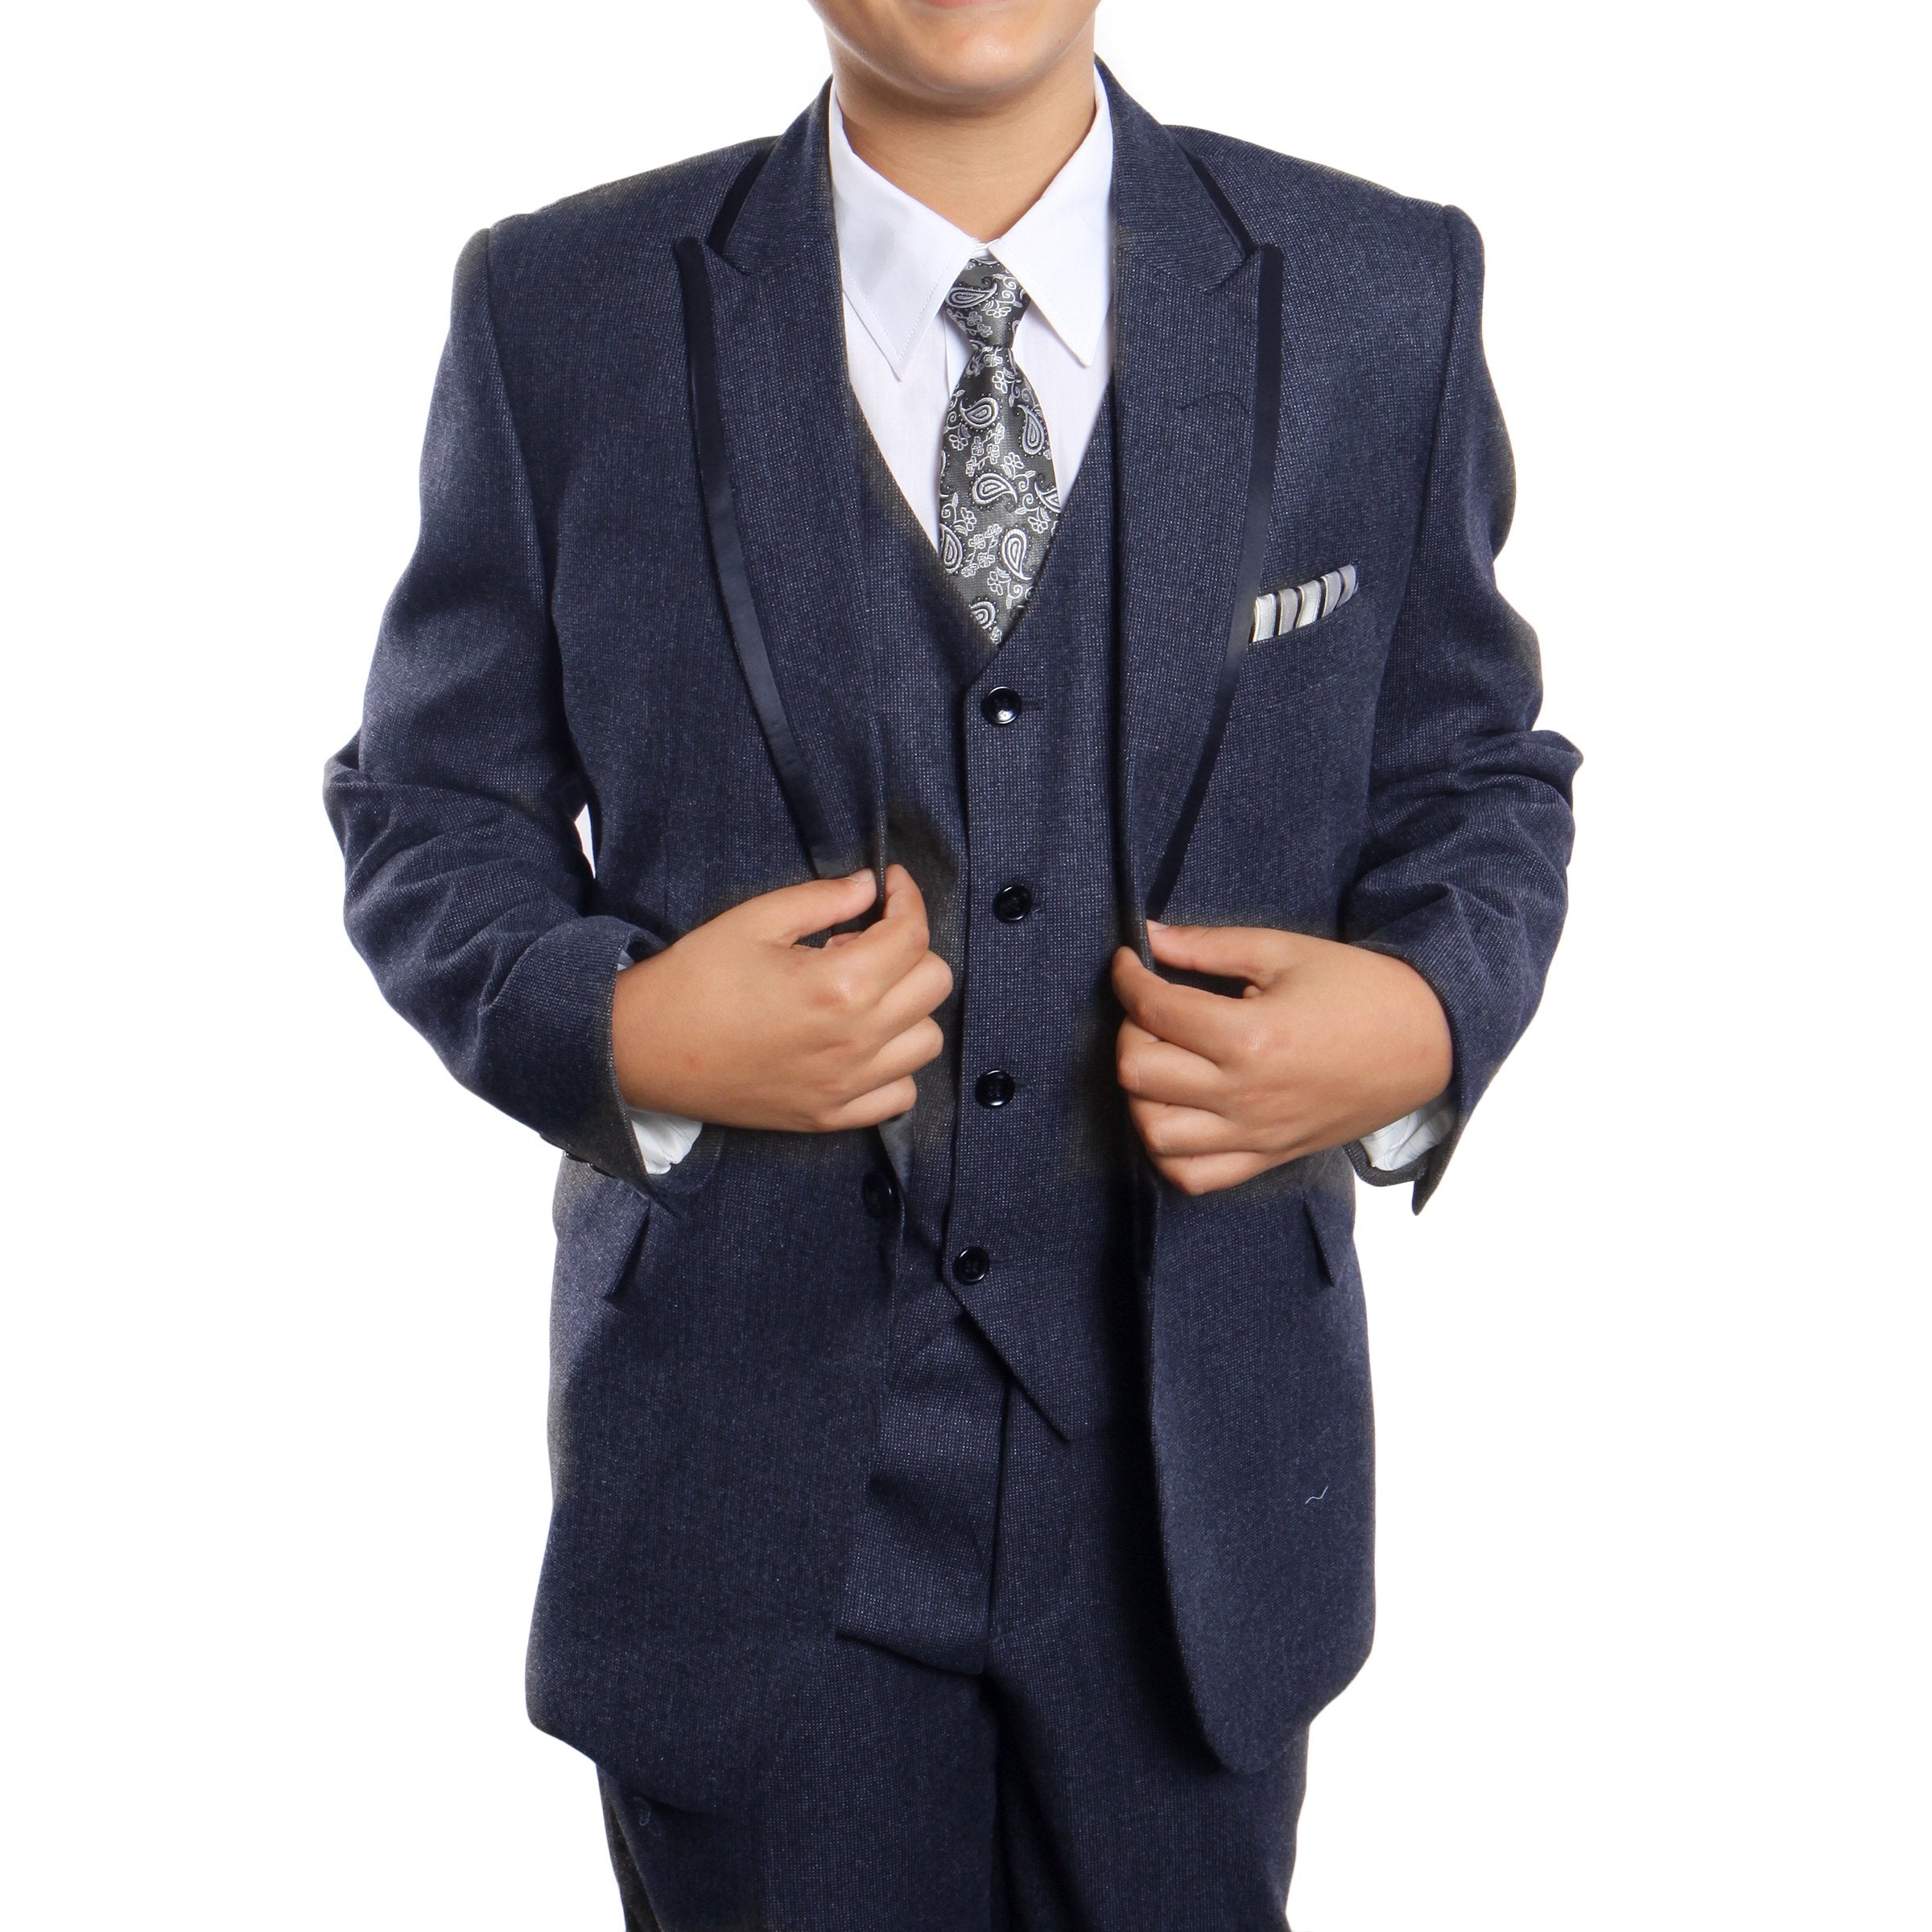 5 Piece Boys Suit With Shirt & Tie Suits For Boy's